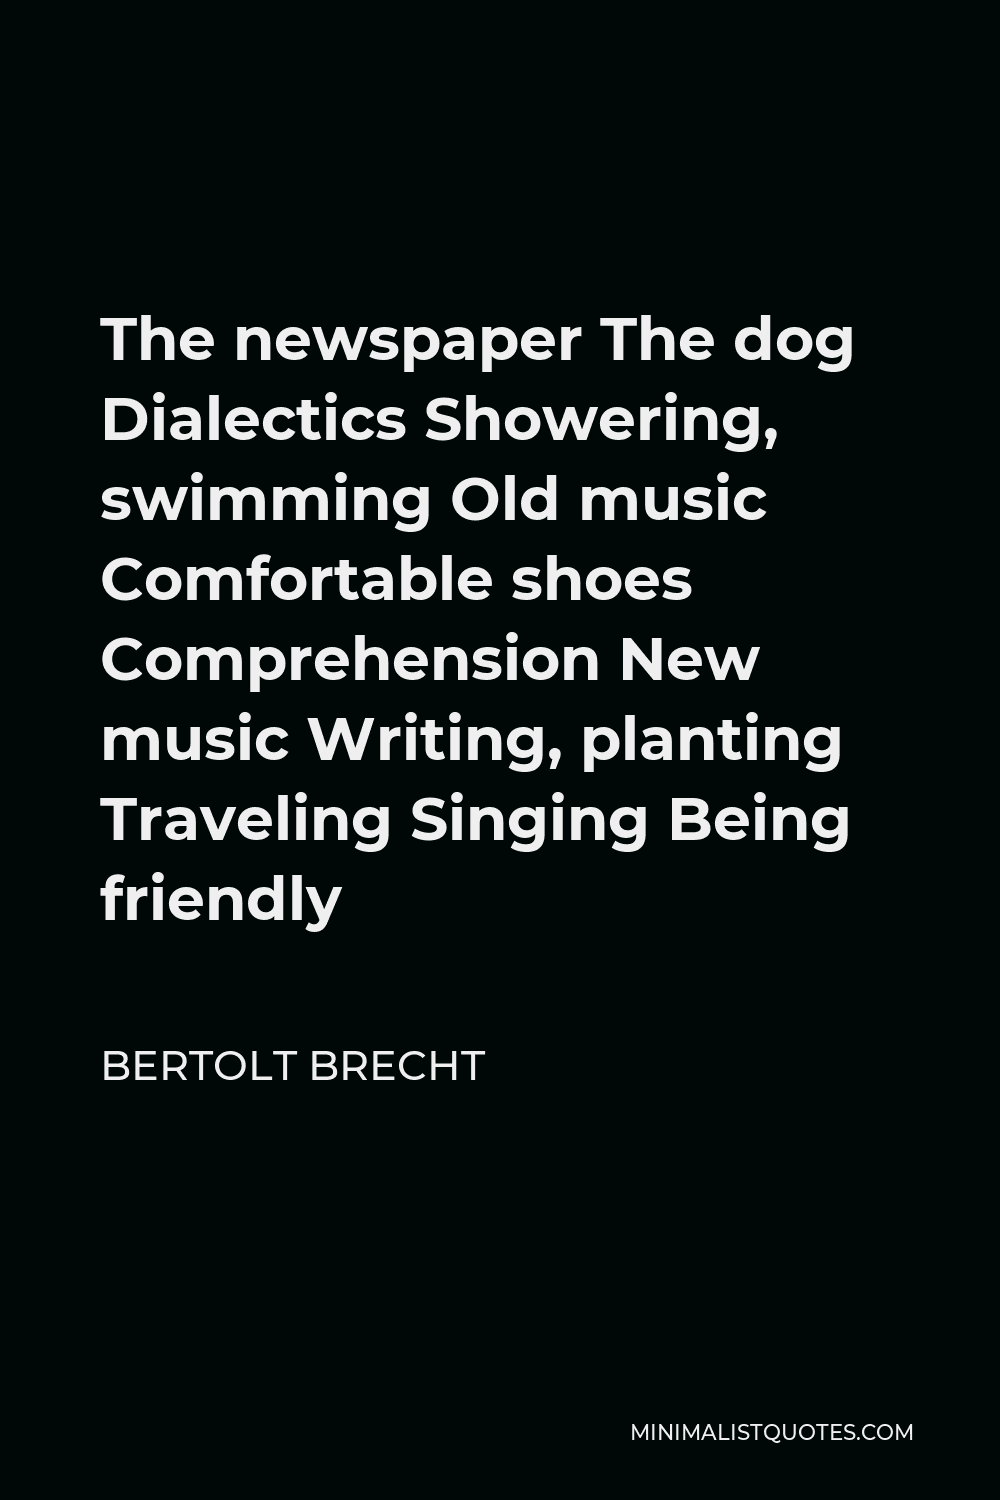 Bertolt Brecht Quote - The newspaper The dog Dialectics Showering, swimming Old music Comfortable shoes Comprehension New music Writing, planting Traveling Singing Being friendly